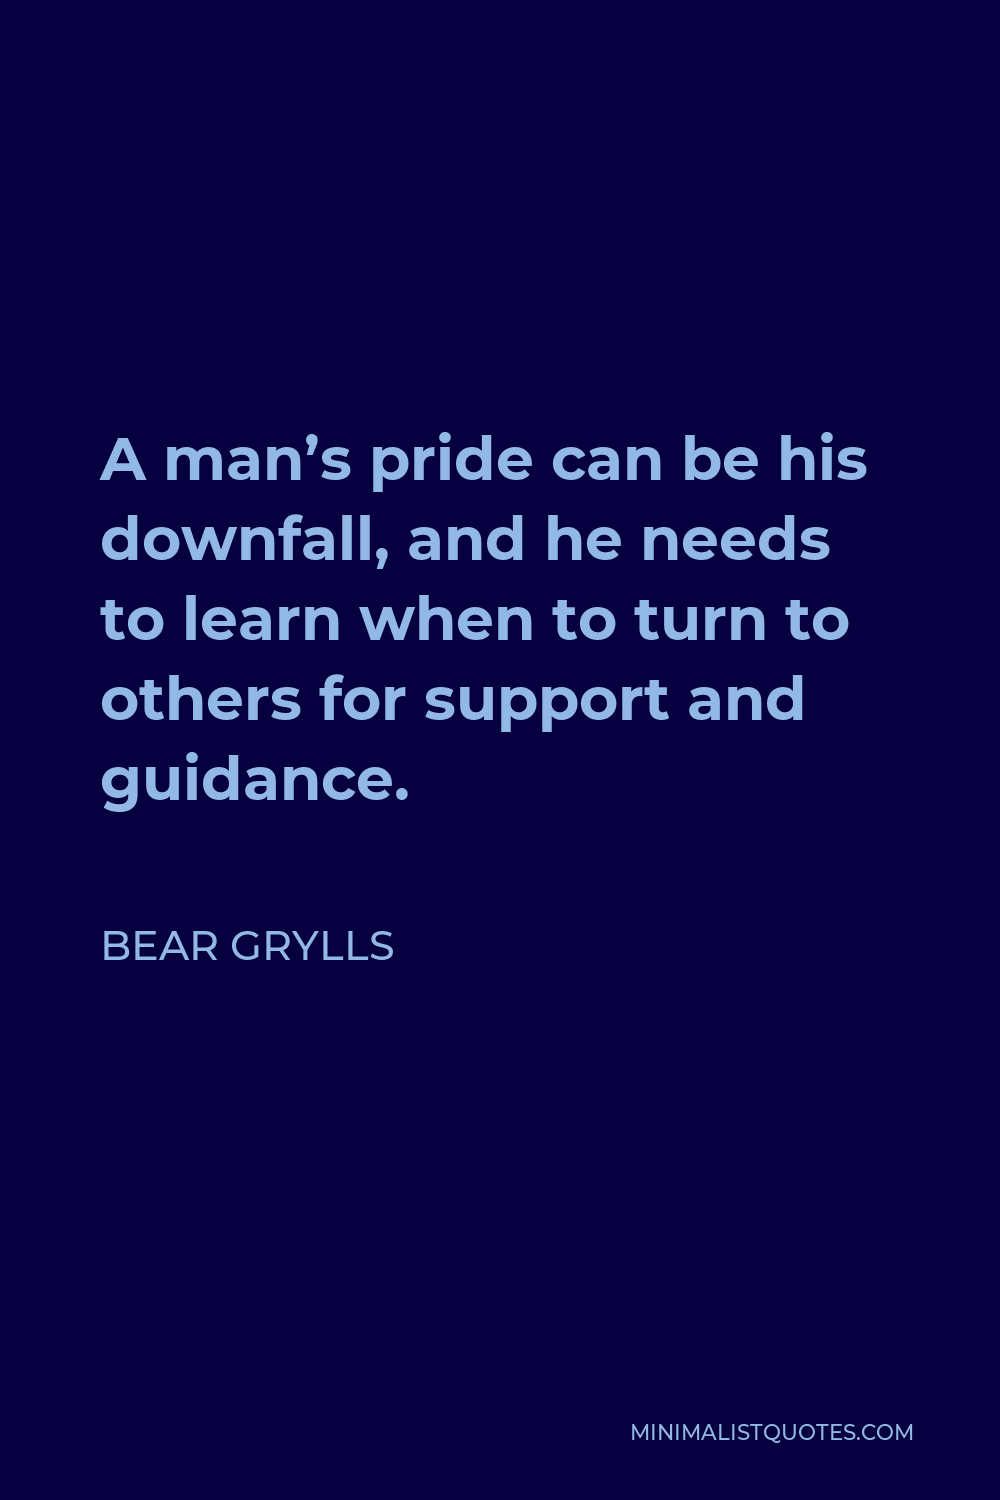 Bear Grylls Quote - A man’s pride can be his downfall, and he needs to learn when to turn to others for support and guidance.